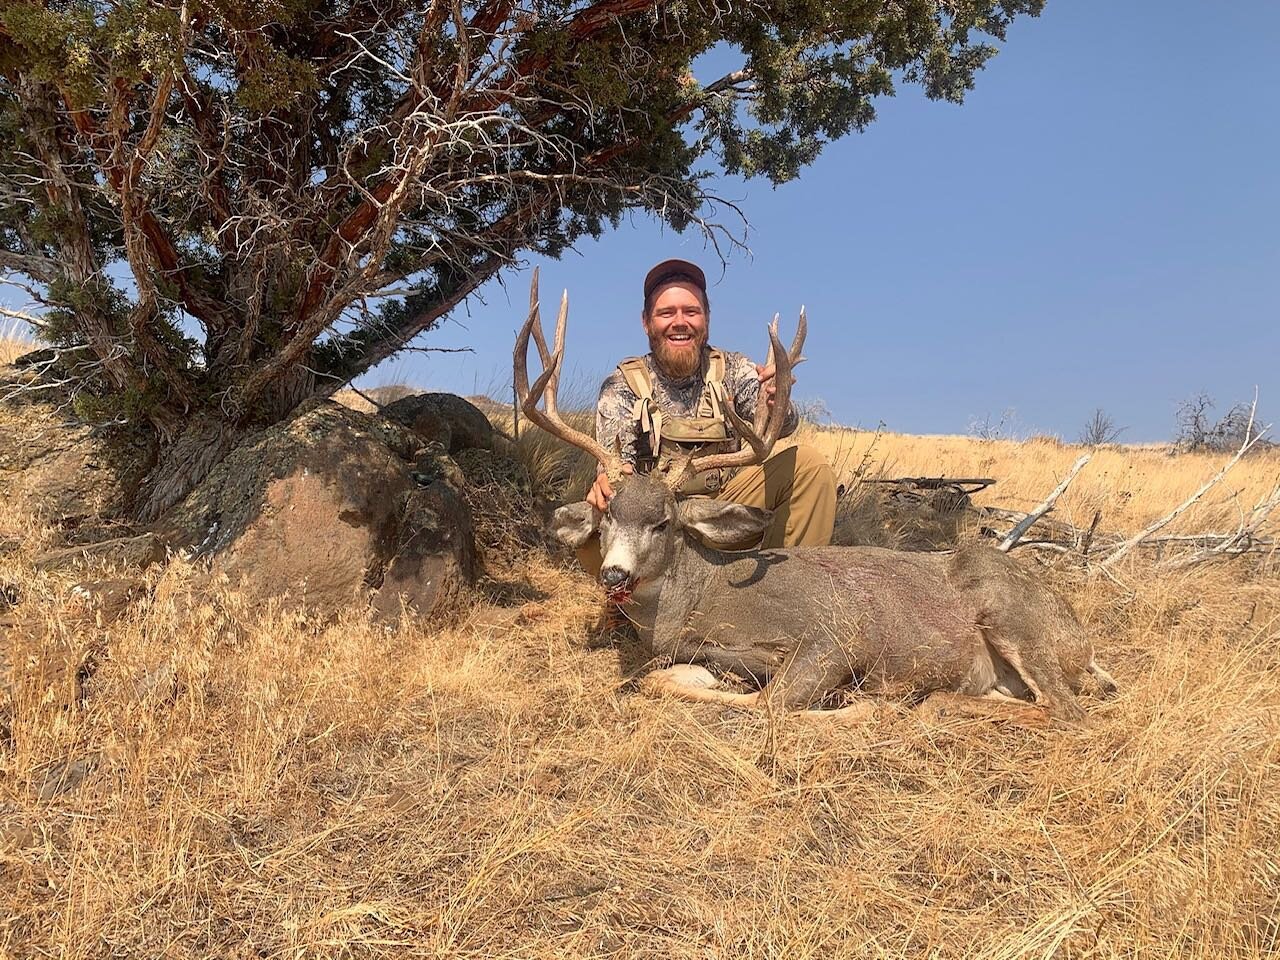 Mike&rsquo;s buck from X5b. I occasionally get to hunt with father-son duos. It&rsquo;s always a great time making memories. 

#muledeer #muledeerhunting #californiadeerhunting #californiamuledeer #x5b